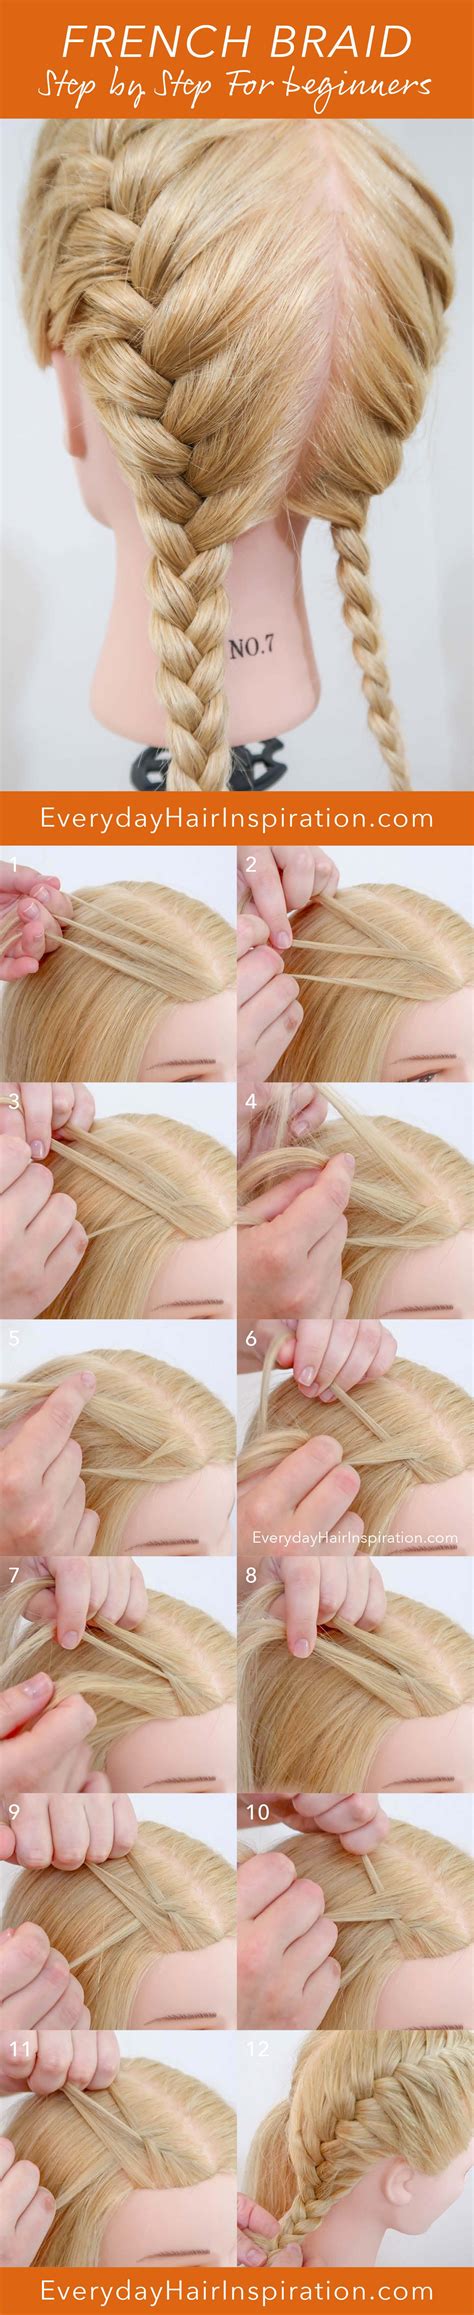 Sometimes my braids have lumps, bumps or don't look as smooth as i'd like. French Braid For Beginners - Everyday Hair inspiration - FRENCH BRAIDS